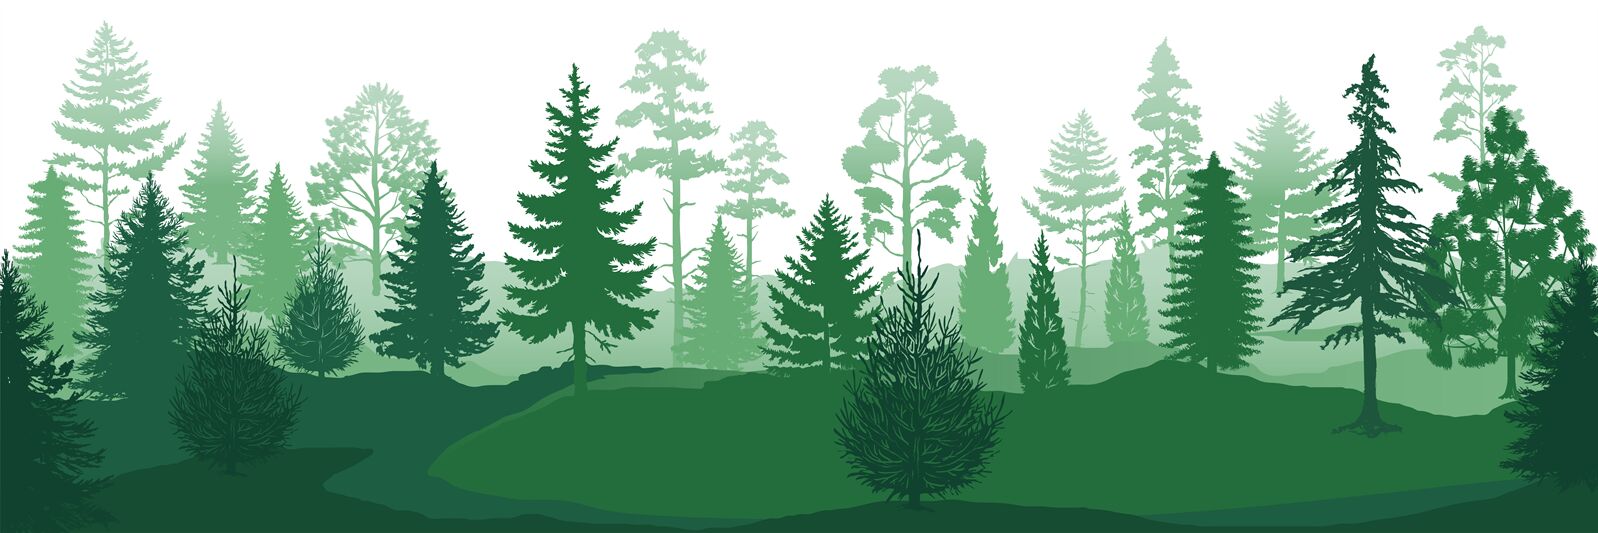 Forest Silhouettes Wild Nature Wood Backgrounds Green Pine Trees Fir By Spicytruffel Thehungryjpeg Com